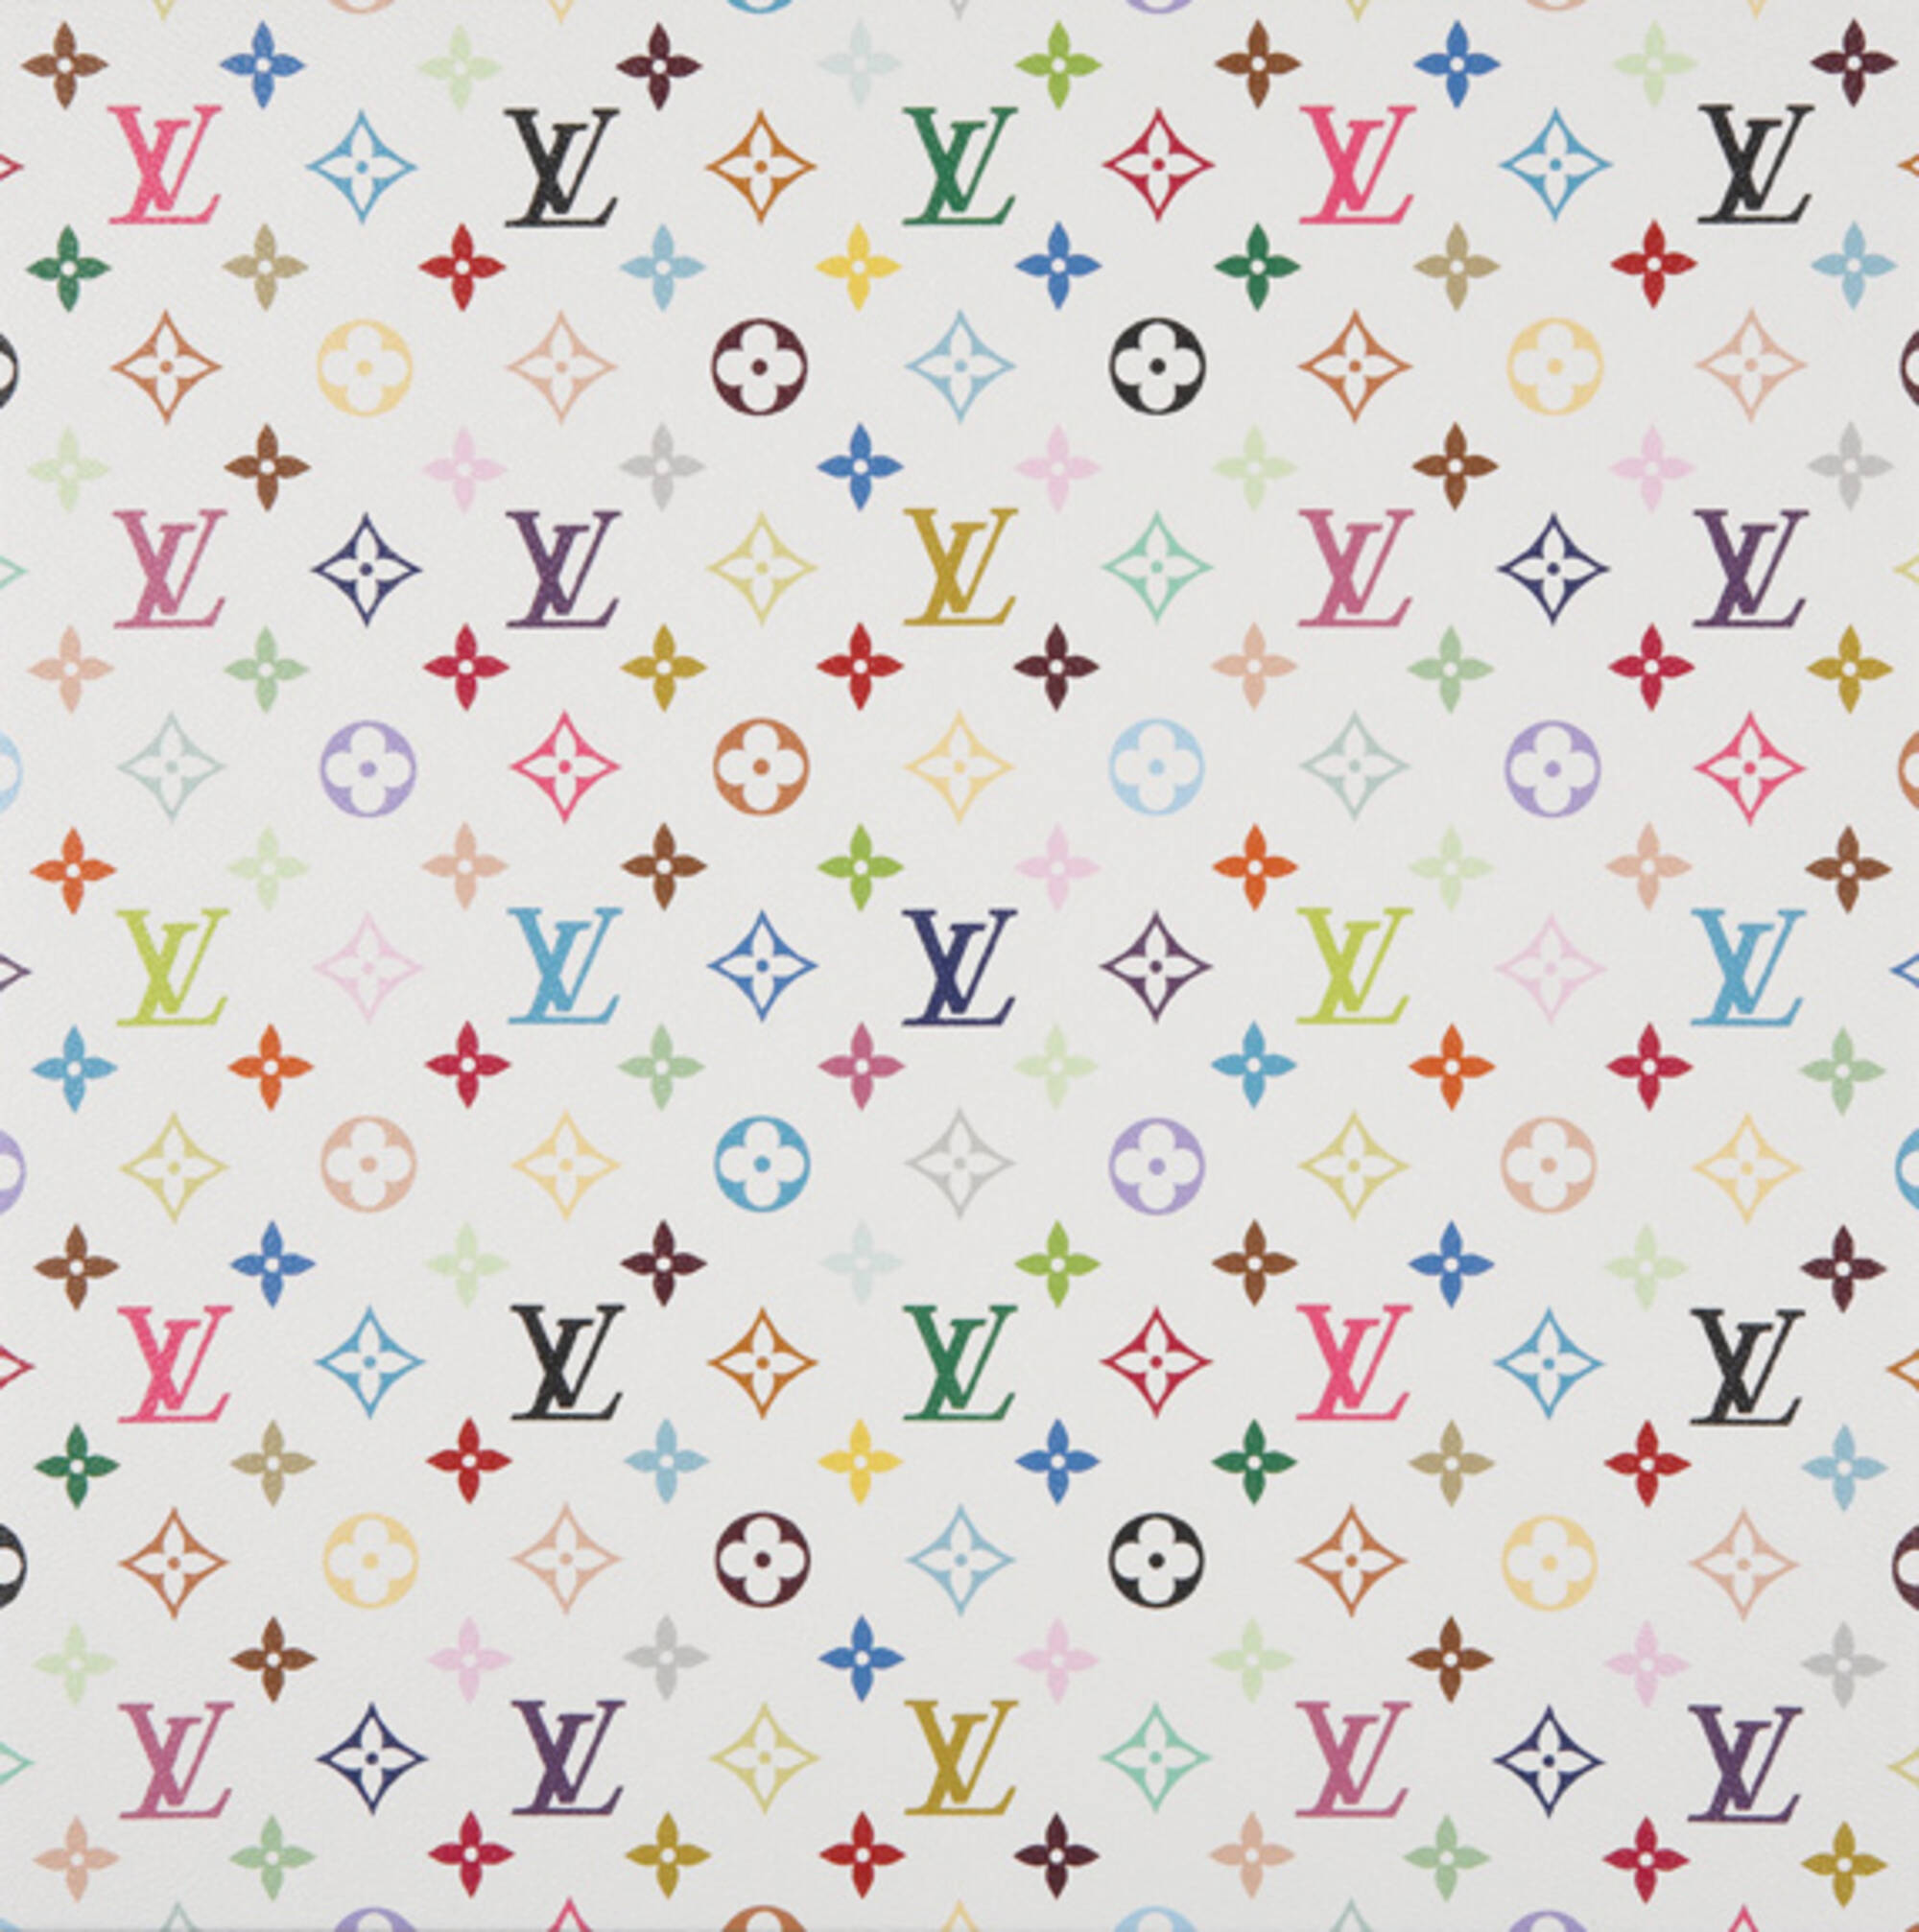 Louis Vuitton Takashi Murakami White Monogram Multicolore Coated Canvas  Heartbreaker Gold Hardware, 2012 Available For Immediate Sale At Sotheby's